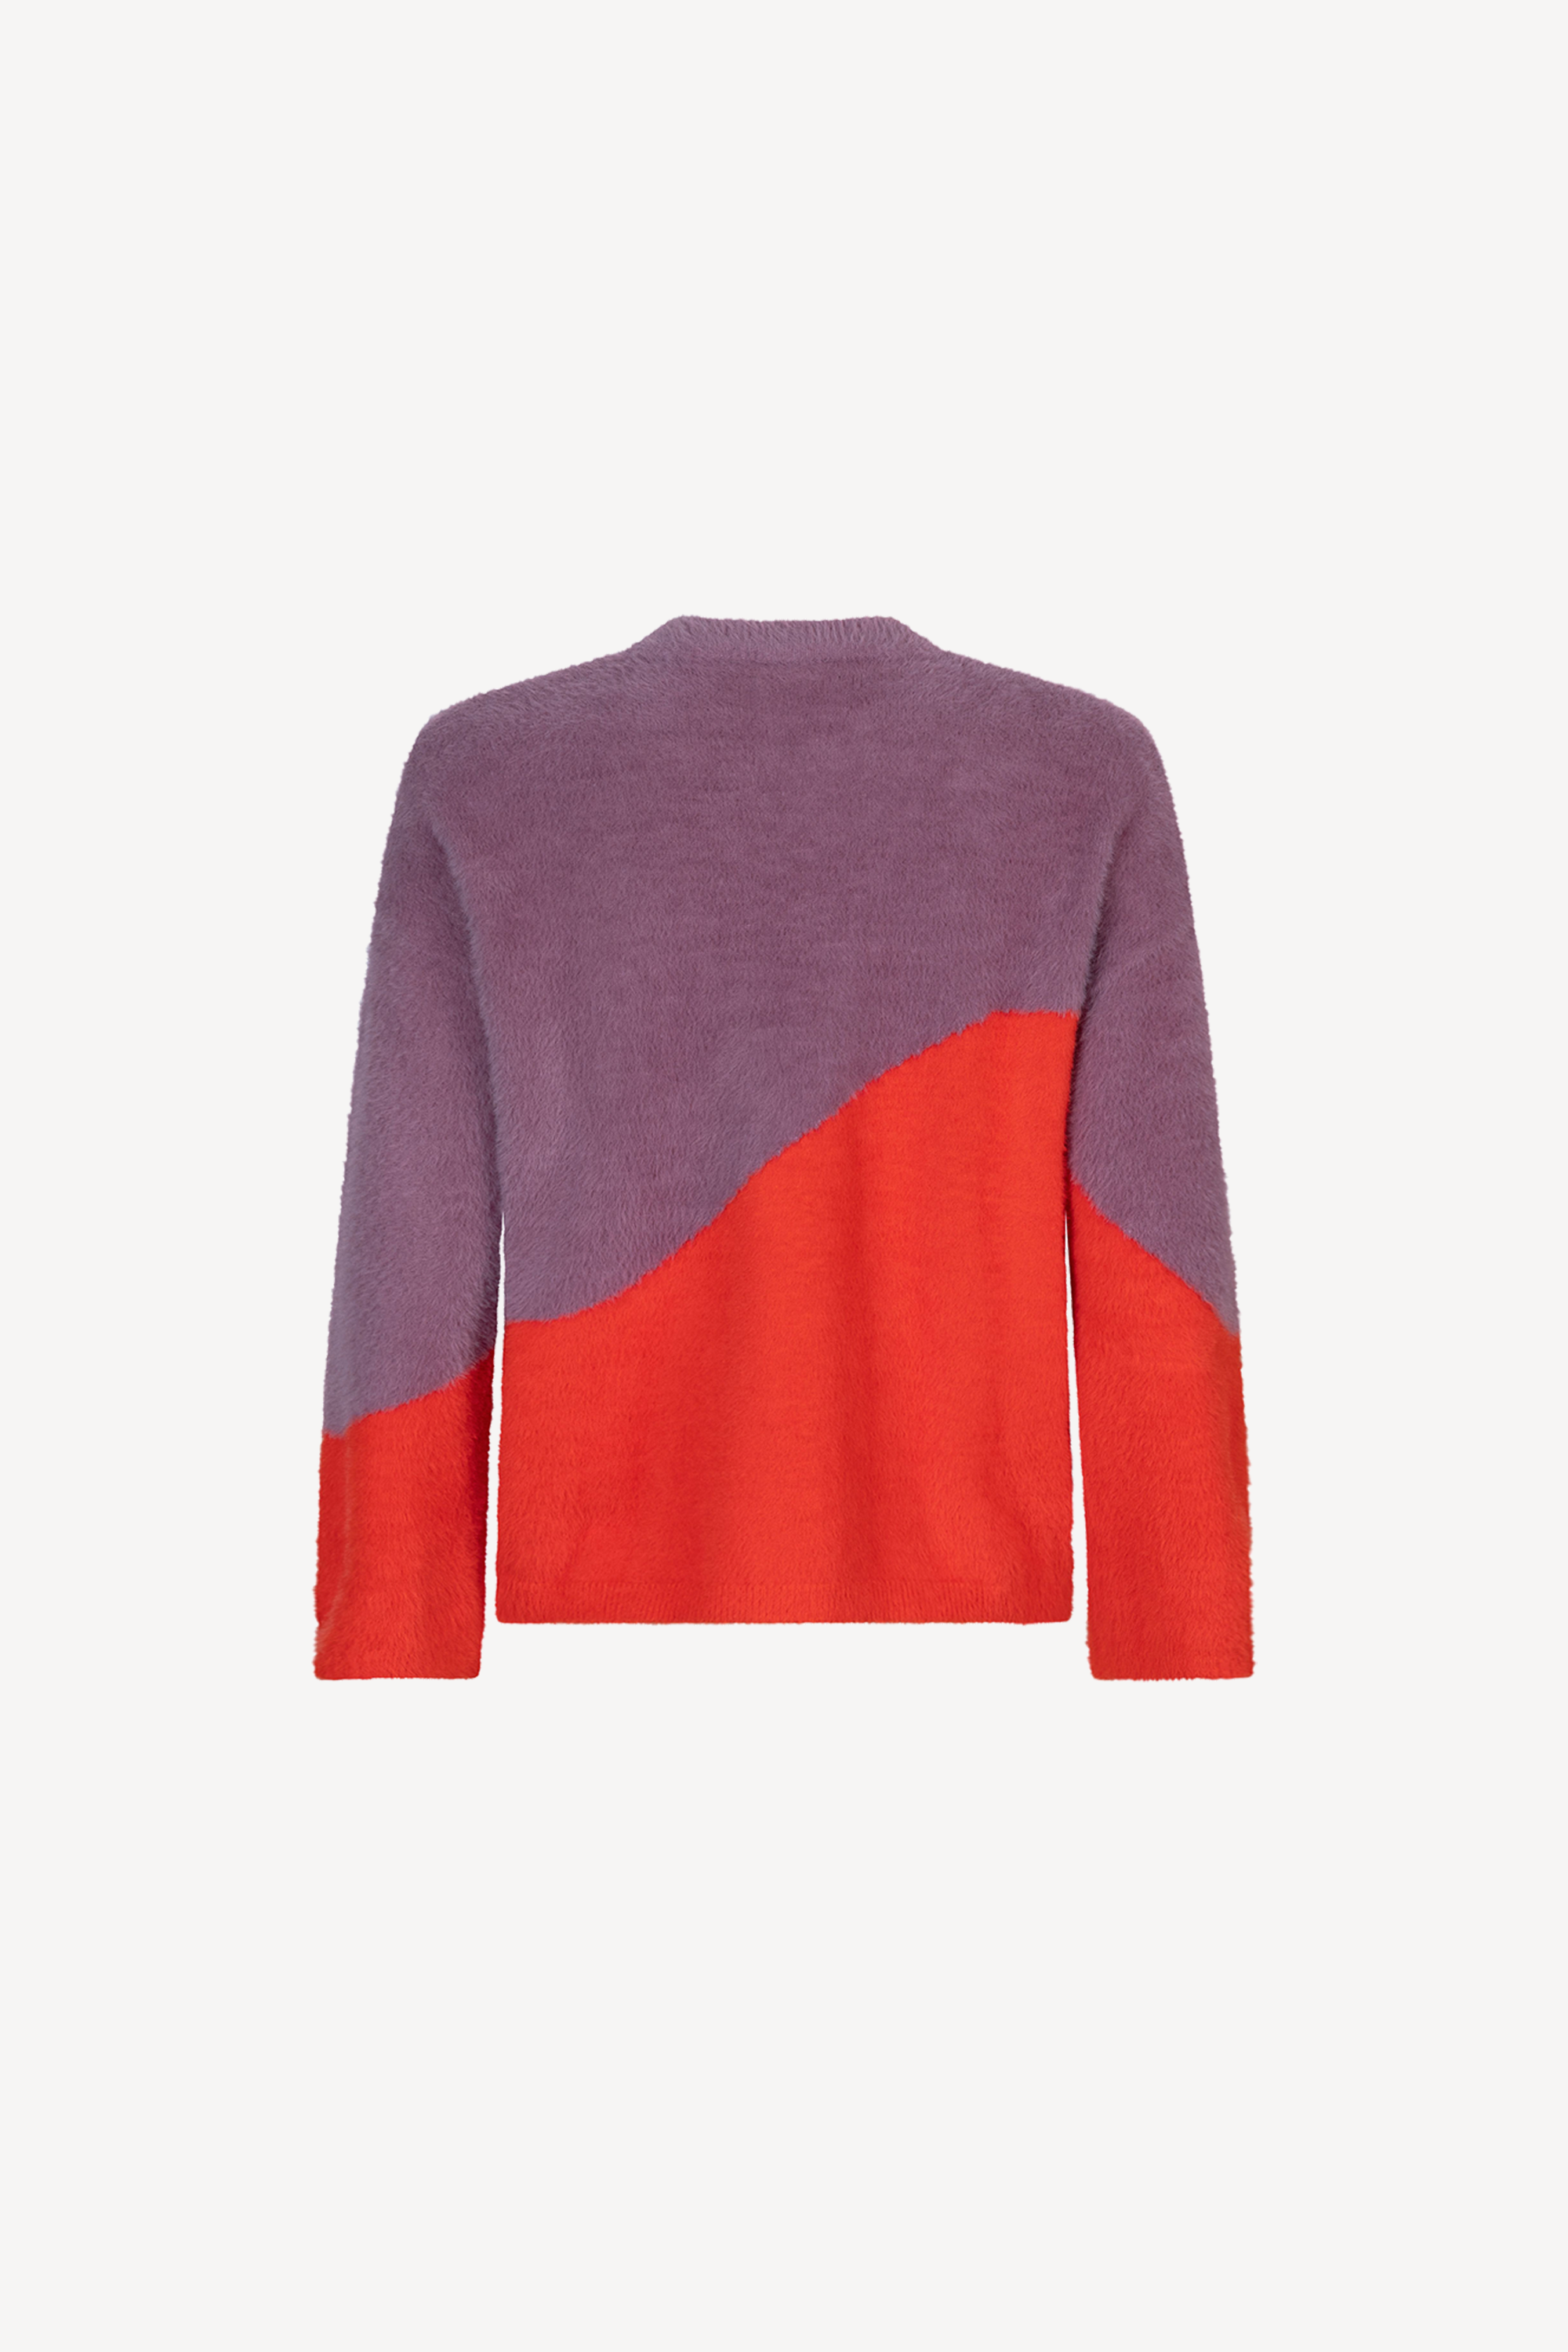 Cilou Knitted Sweater Dusty Purple/Coral Red